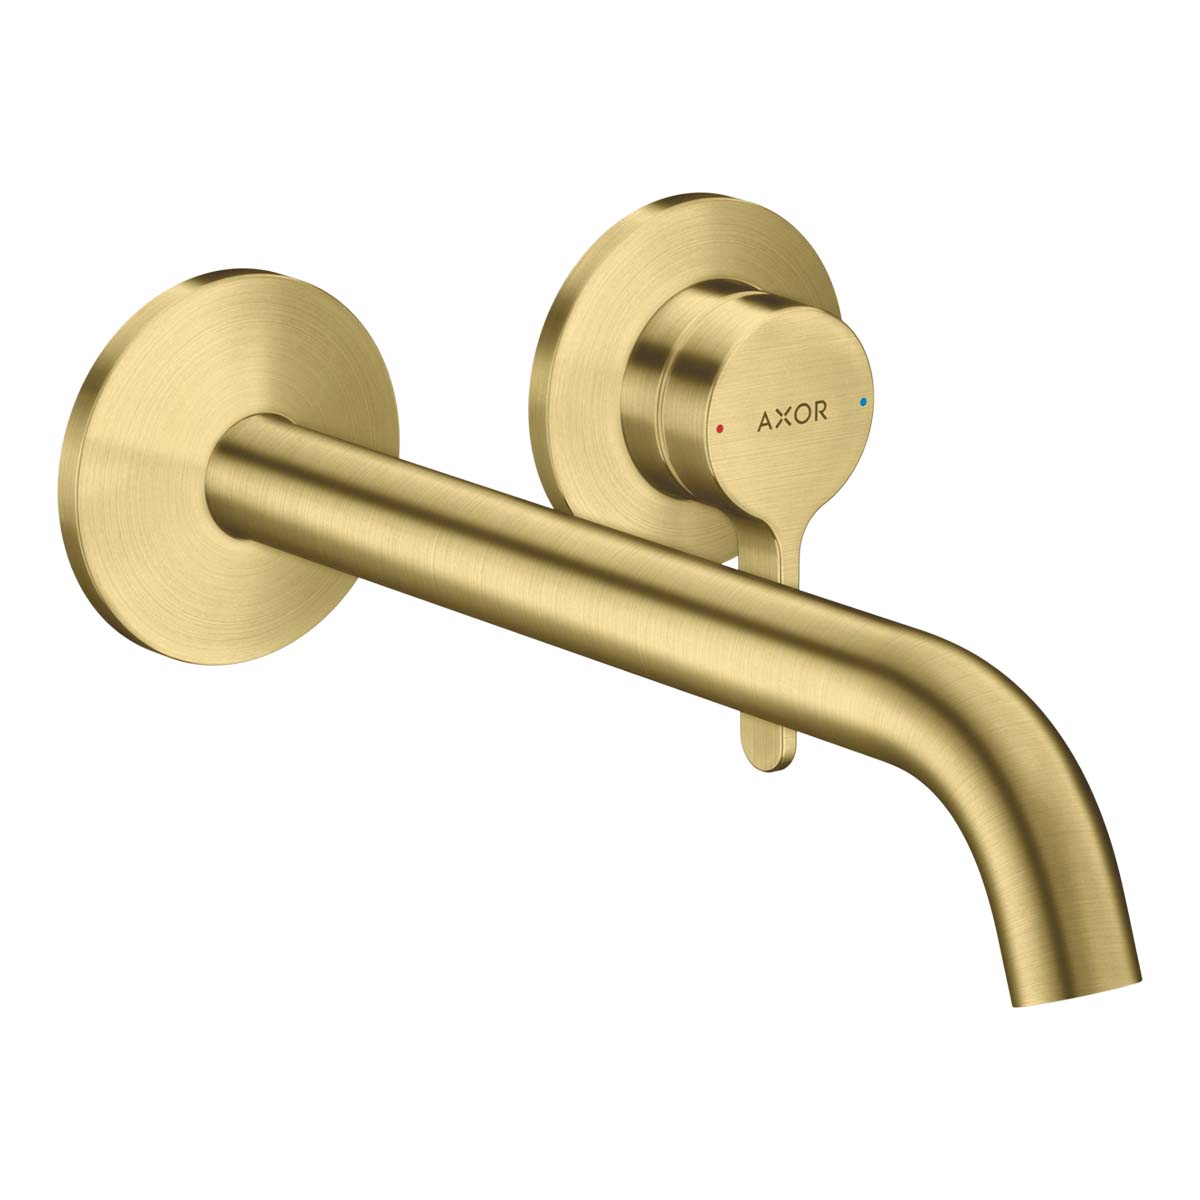 Hansgrohe Axor One Wall Mounted 2 Hole Basin Mixer Tap Brushed Brass